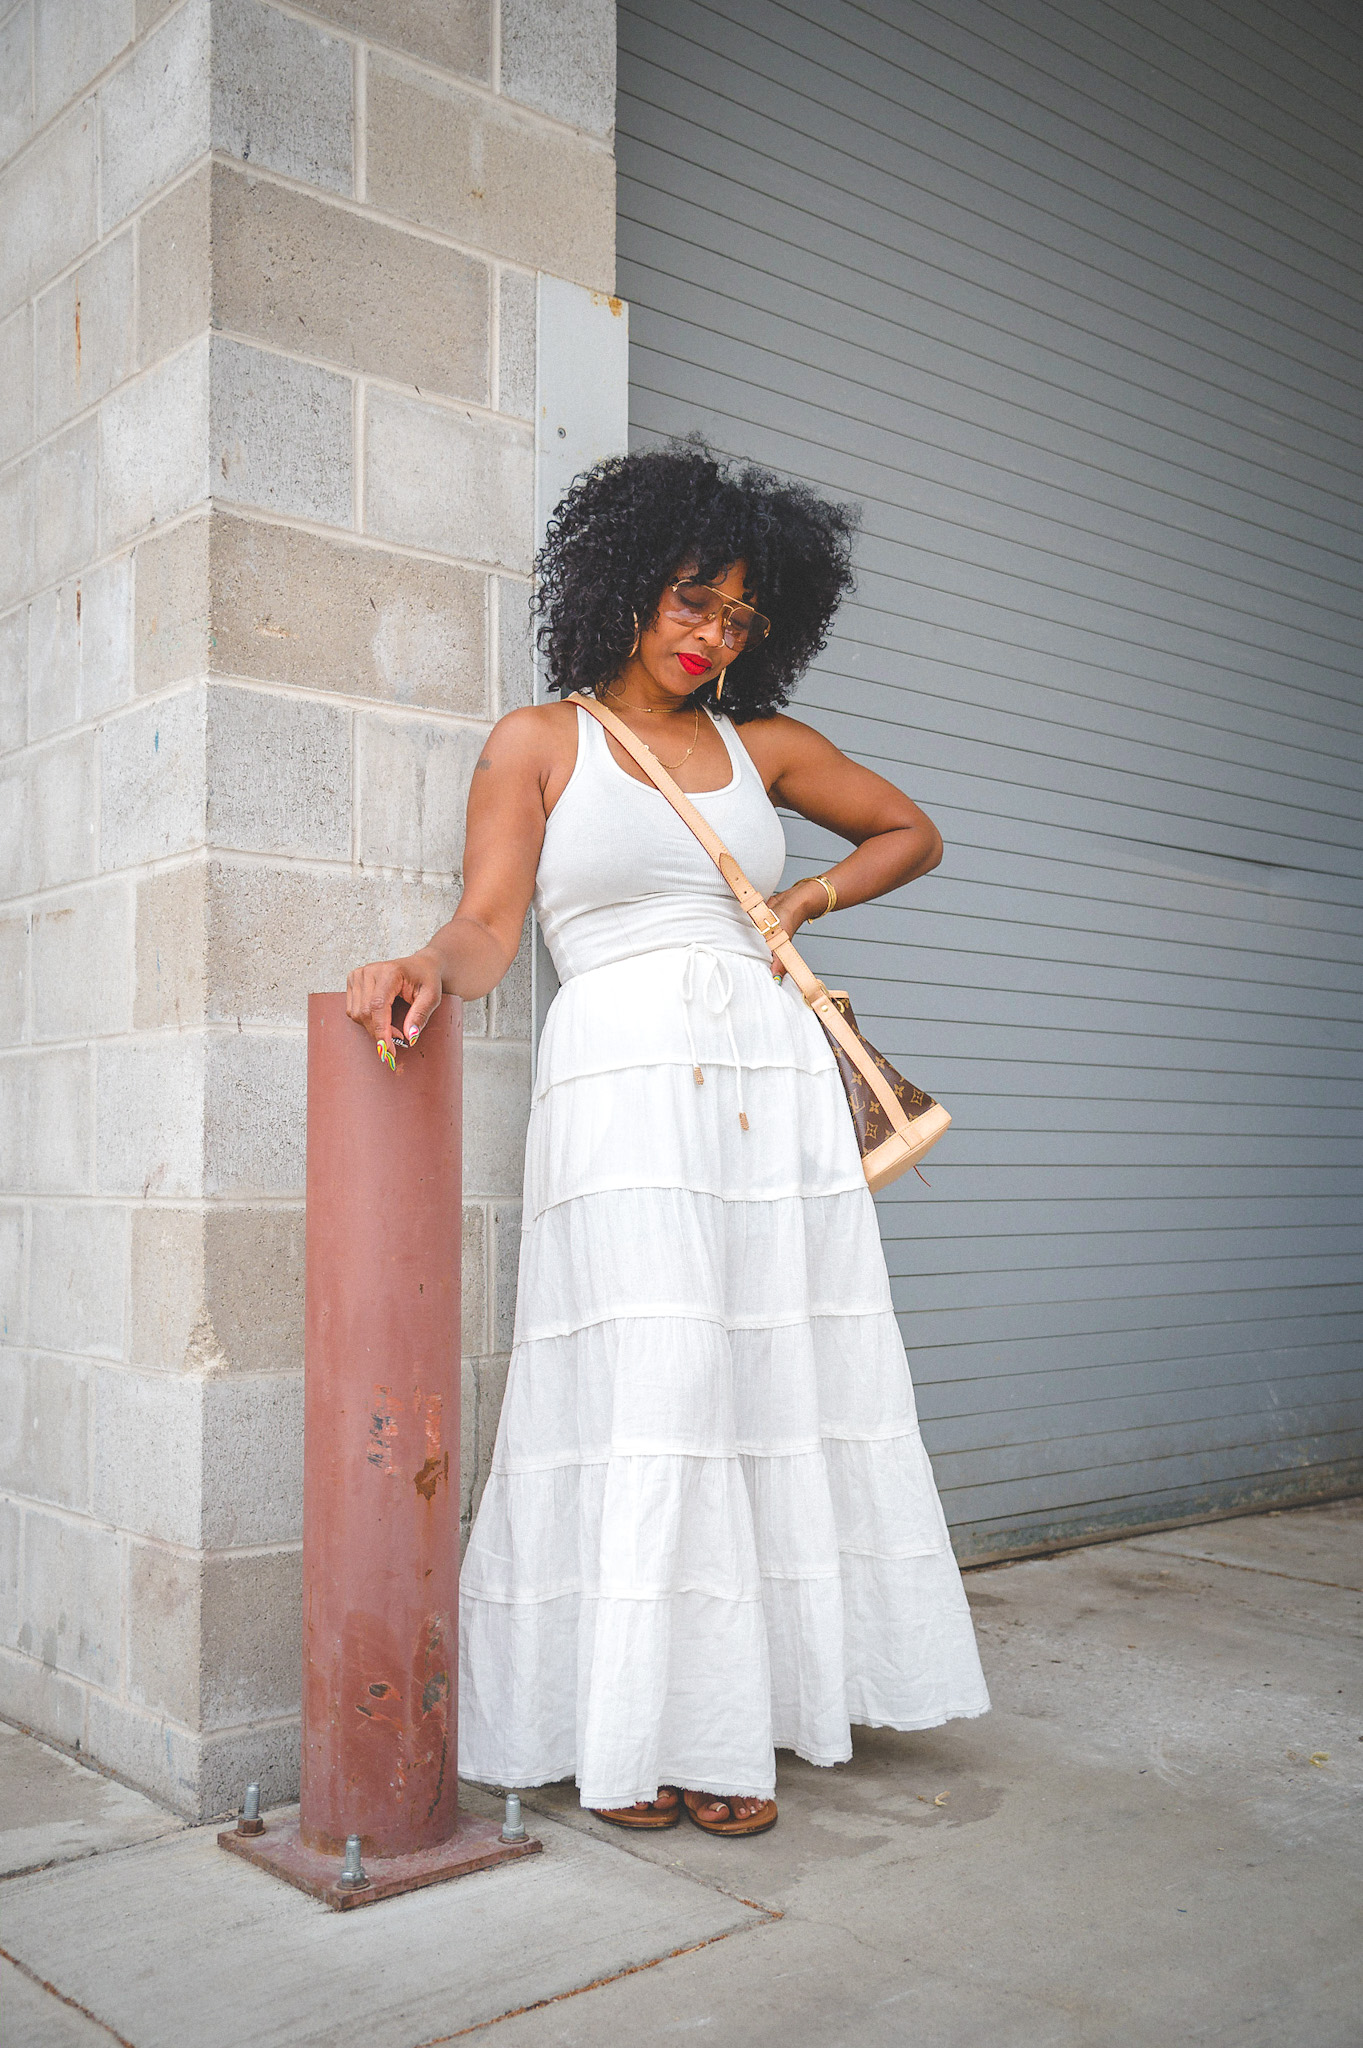 SWEENEE STYLE, FREE PEOPLE STYLE,  SUMMER OUTFIT, HOW TO WEAR CREAM, CREAM SKIRT, MAXI SKIRT OUTFITS, NATURAL HAIRSTYLES, BLOGGER, INDIANAPOLIS BLOGGER, INDIANAPOLIS INFLUENCER, INDIANA FASHION CONTENT CREATOR, LOUIS VUITTON HANDBAGS